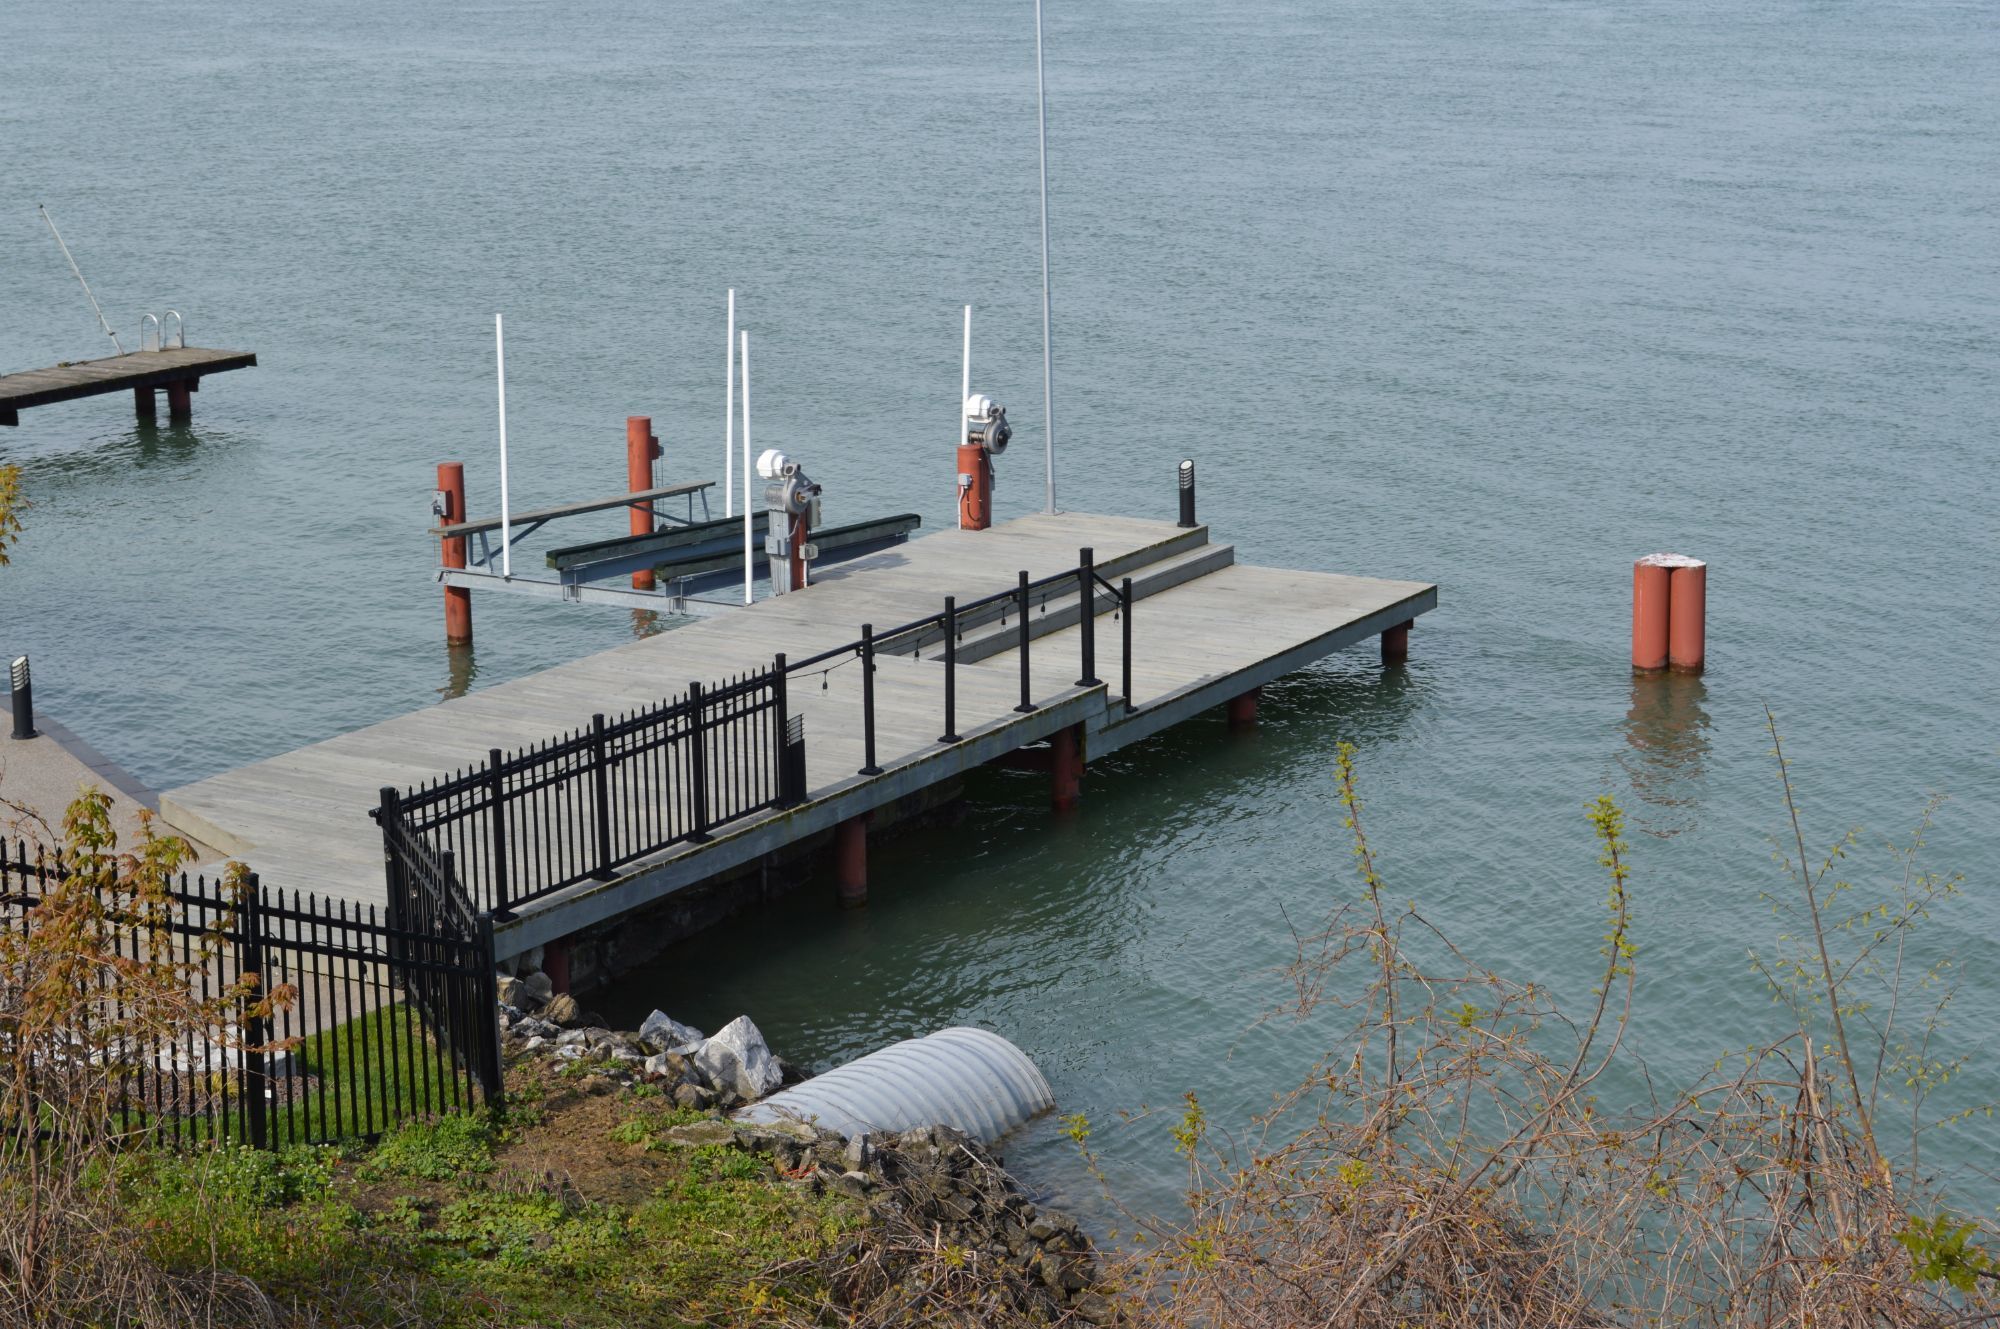 Down the steep incline at the outskirts of Amherstburg we tacked this railing installation along the dock. The customer was having boaters tie up while visiting the tourist information centre, and wawterted to restrict access. Beautiful Victoria Railing installation